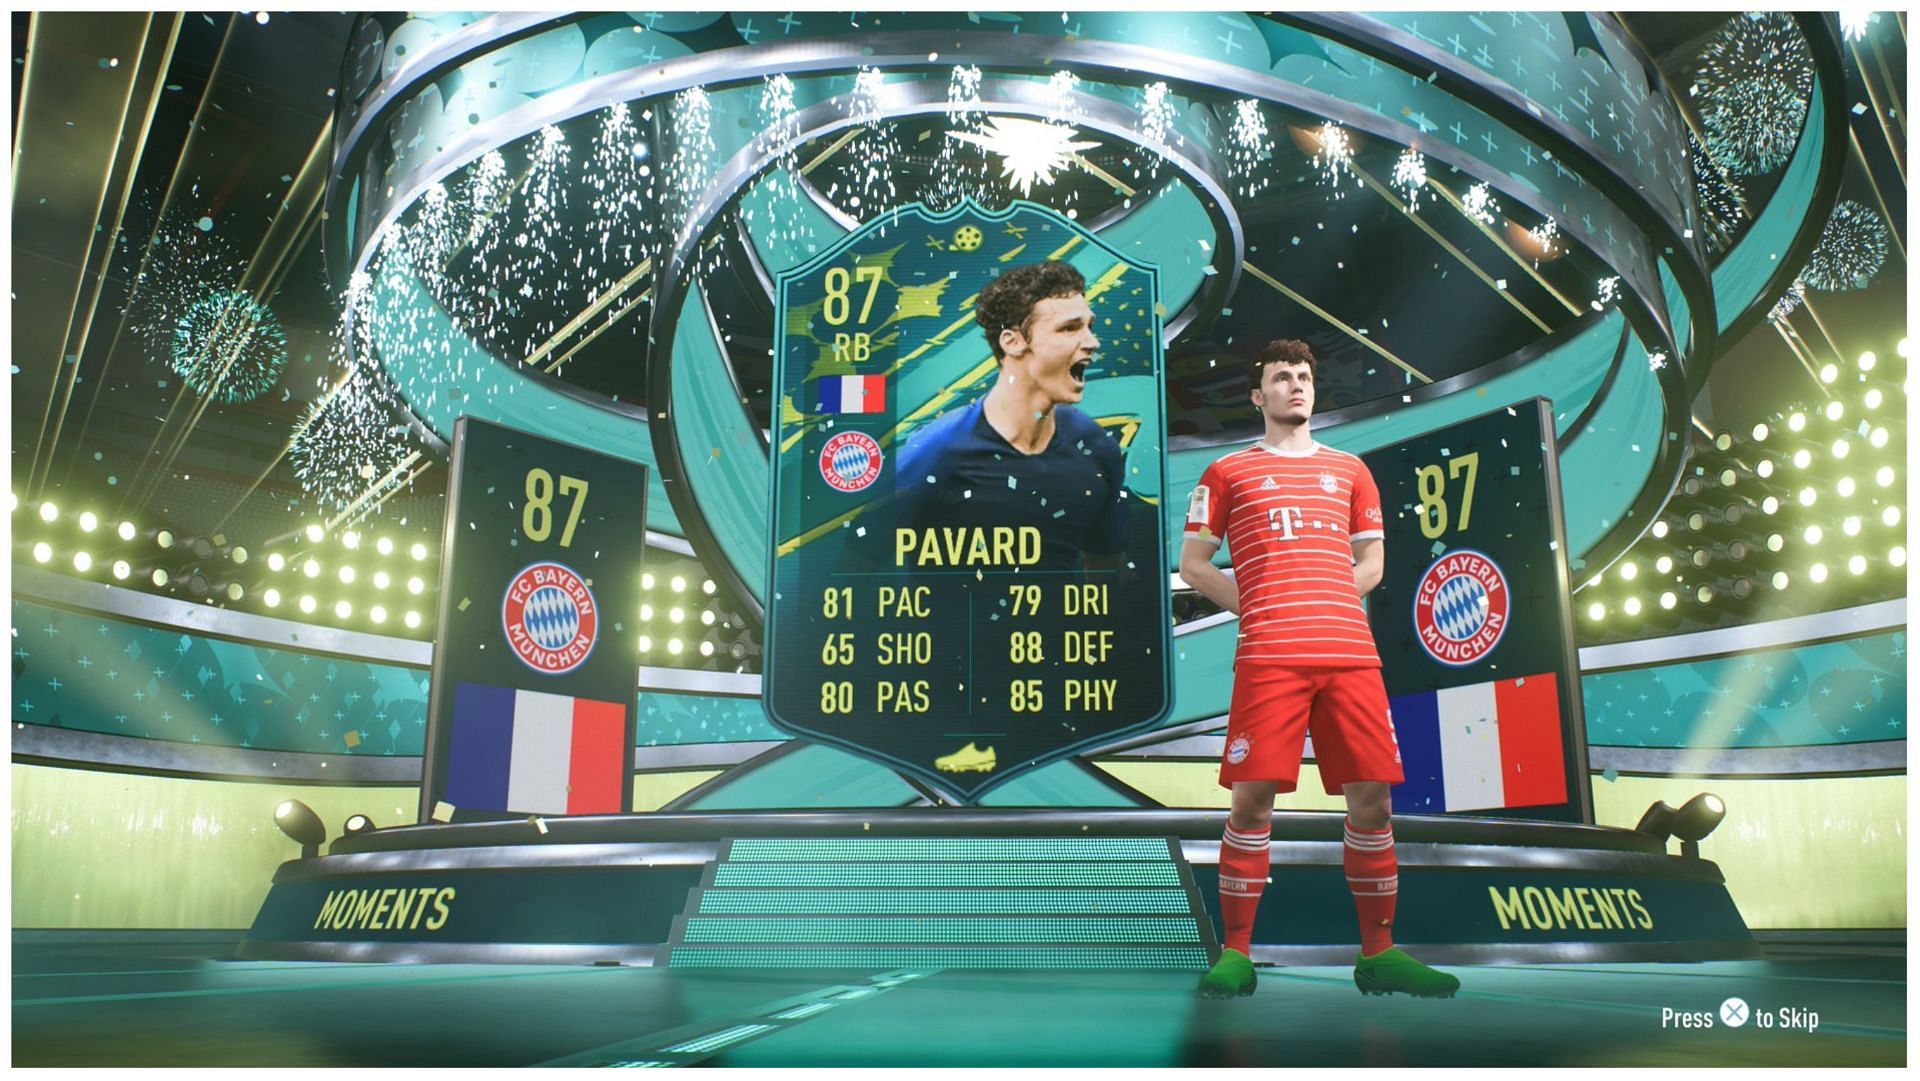 Benjamin Pavard has received an objective card in FIFA 23 (Image via EA Sports)